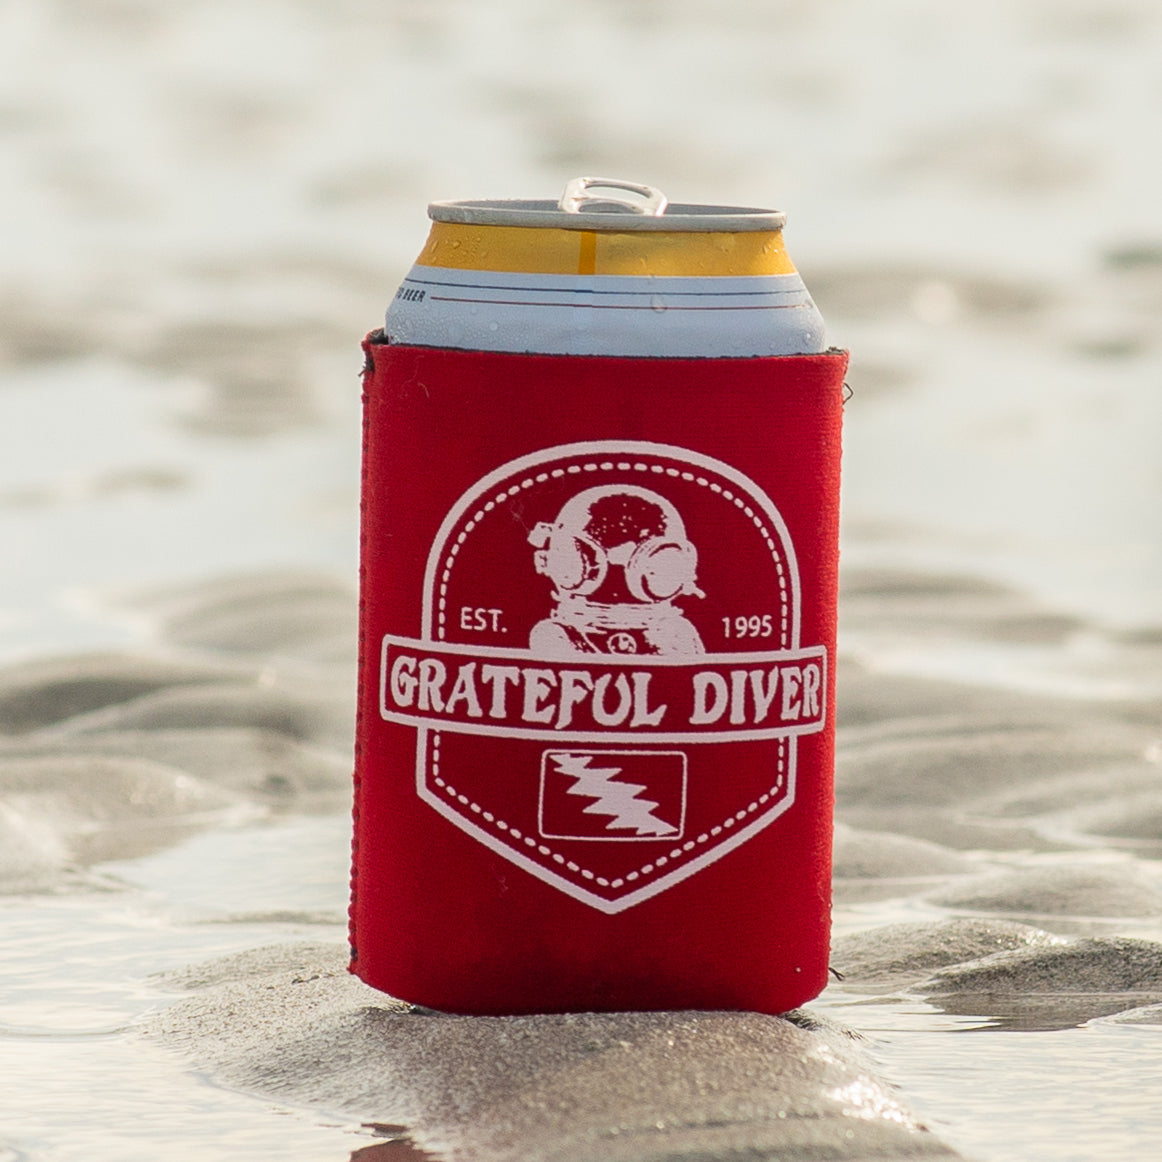 Koozies - Should You Save Your Money? 